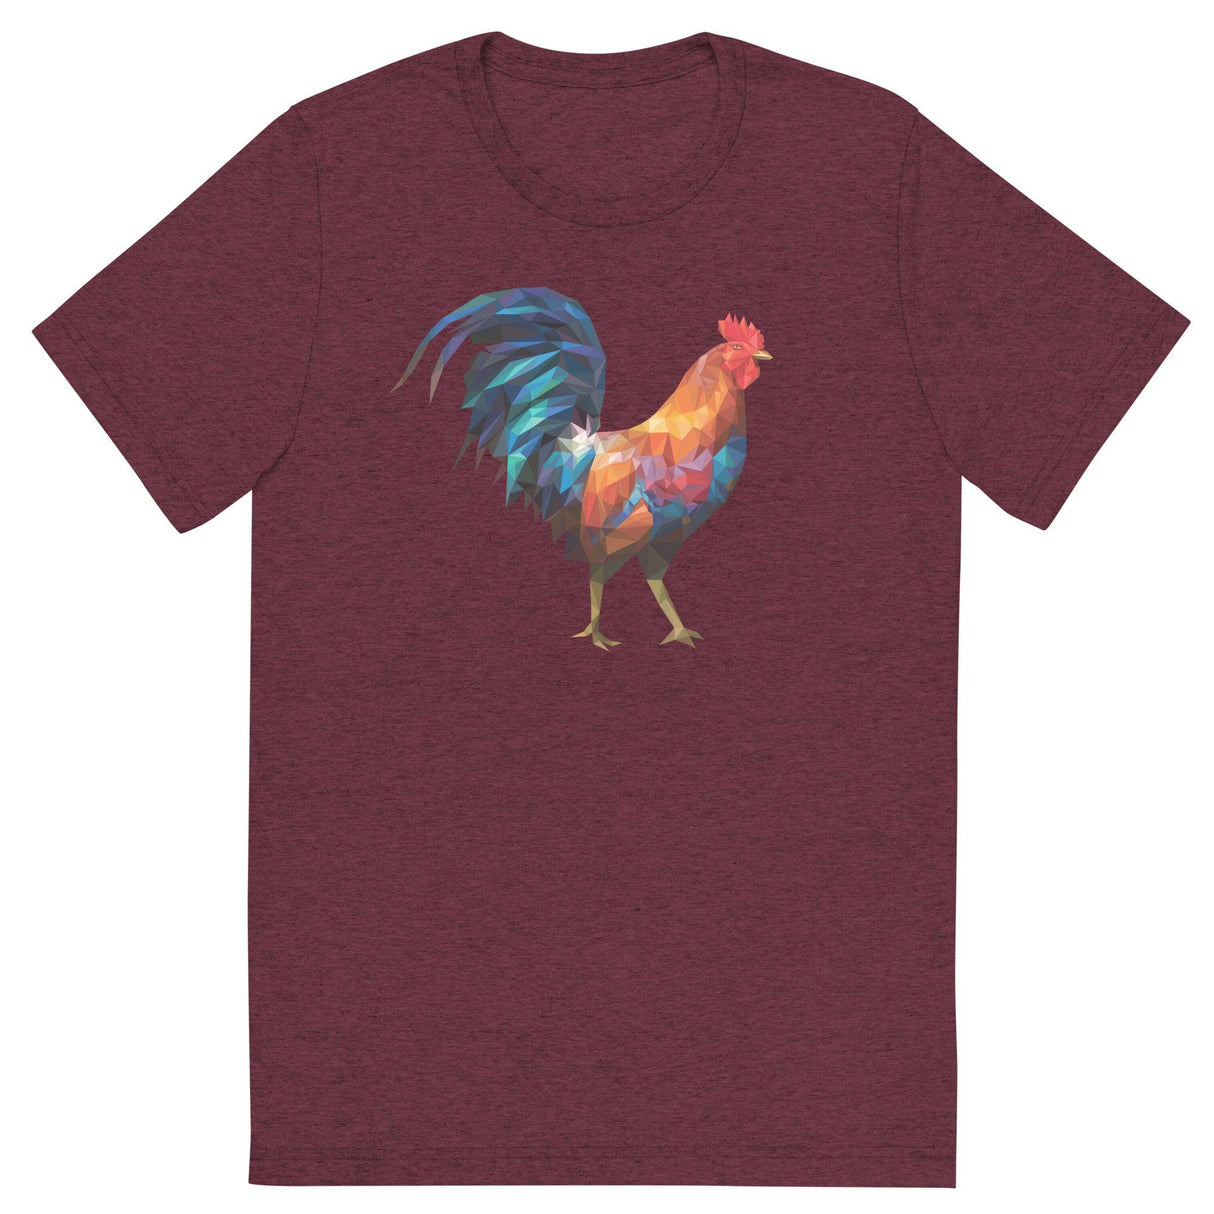 Huge Polygon Rooster (Retail Triblend)-Triblend T-Shirt-Swish Embassy